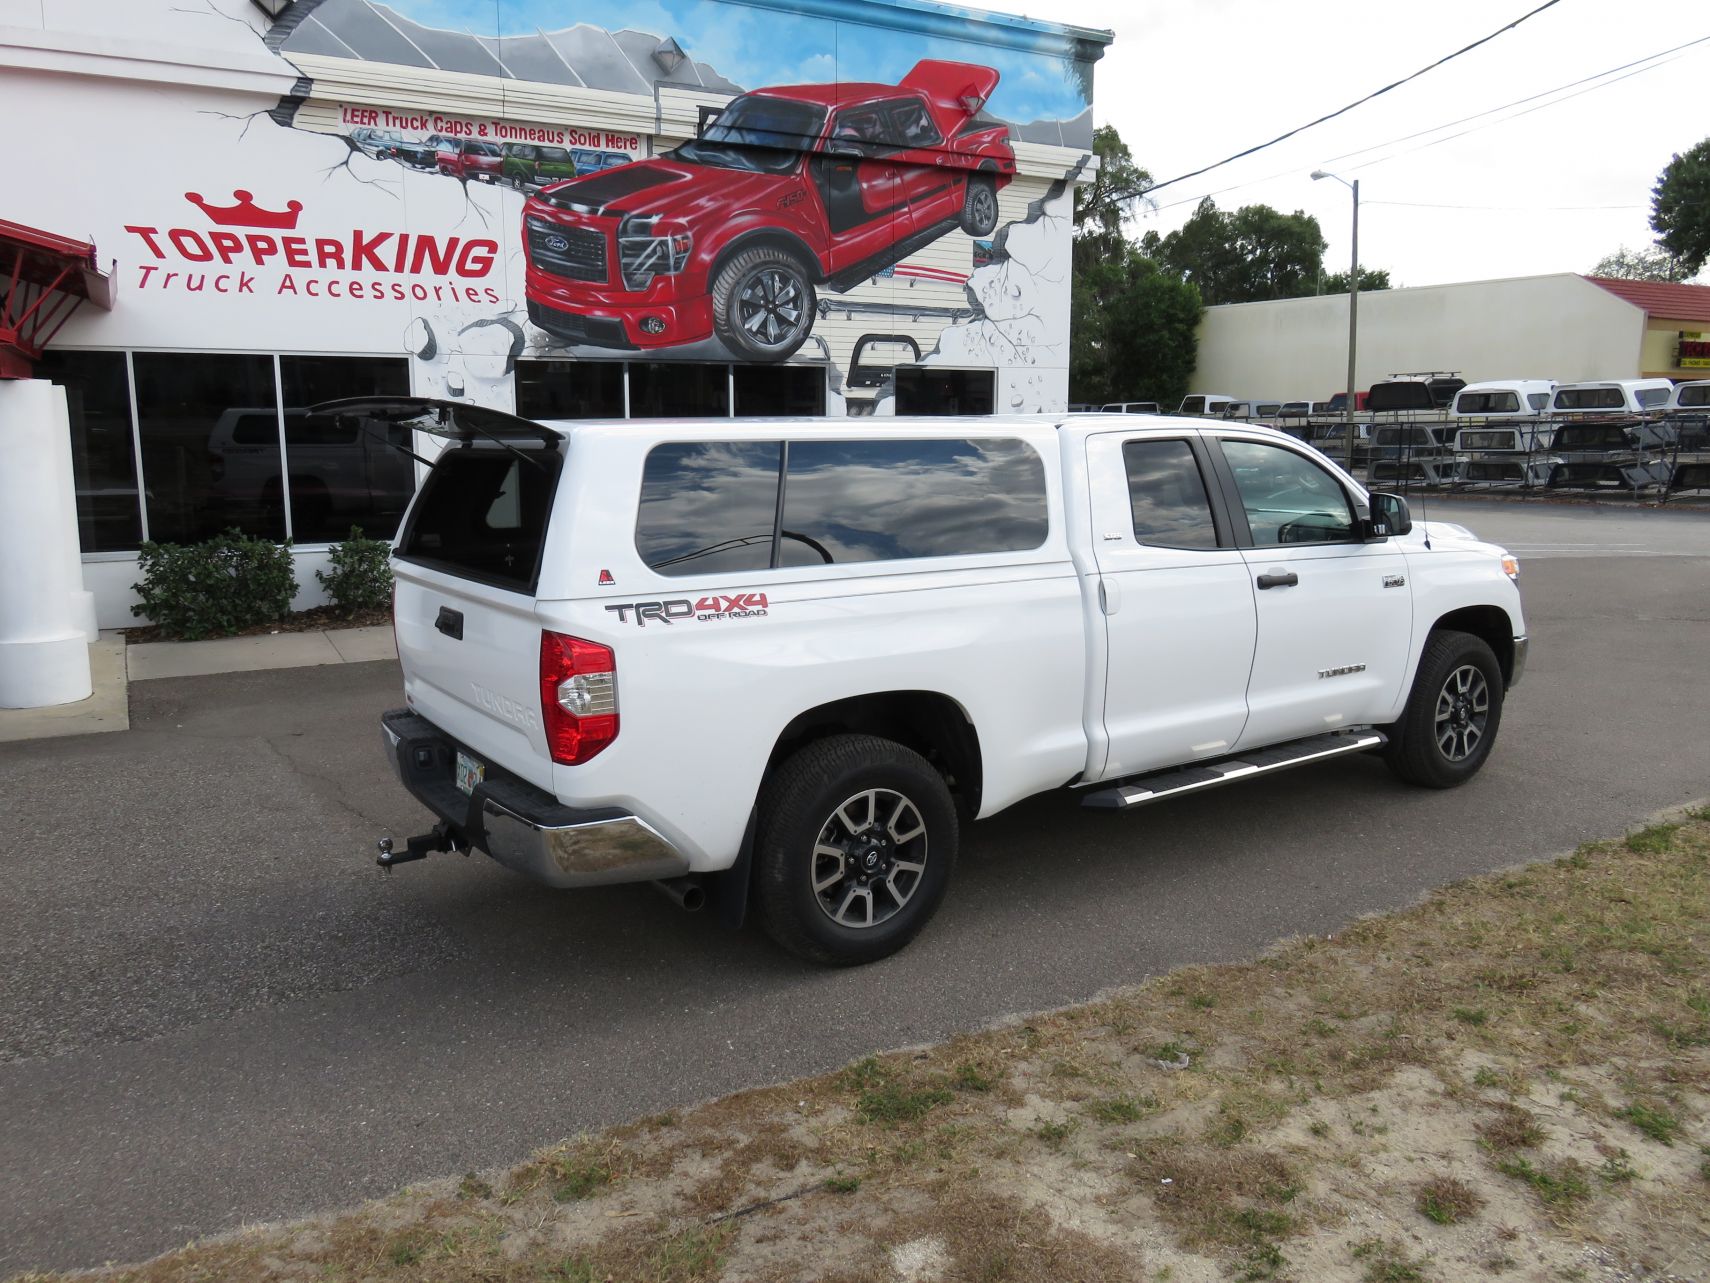 2017 Toyota Tundra with LEER 100XL, Nerf Bars, Hitch, Tint by TopperKING in Brandon, FL 813-689-2449 or Clearwater, FL 727-530-9066. Call today!